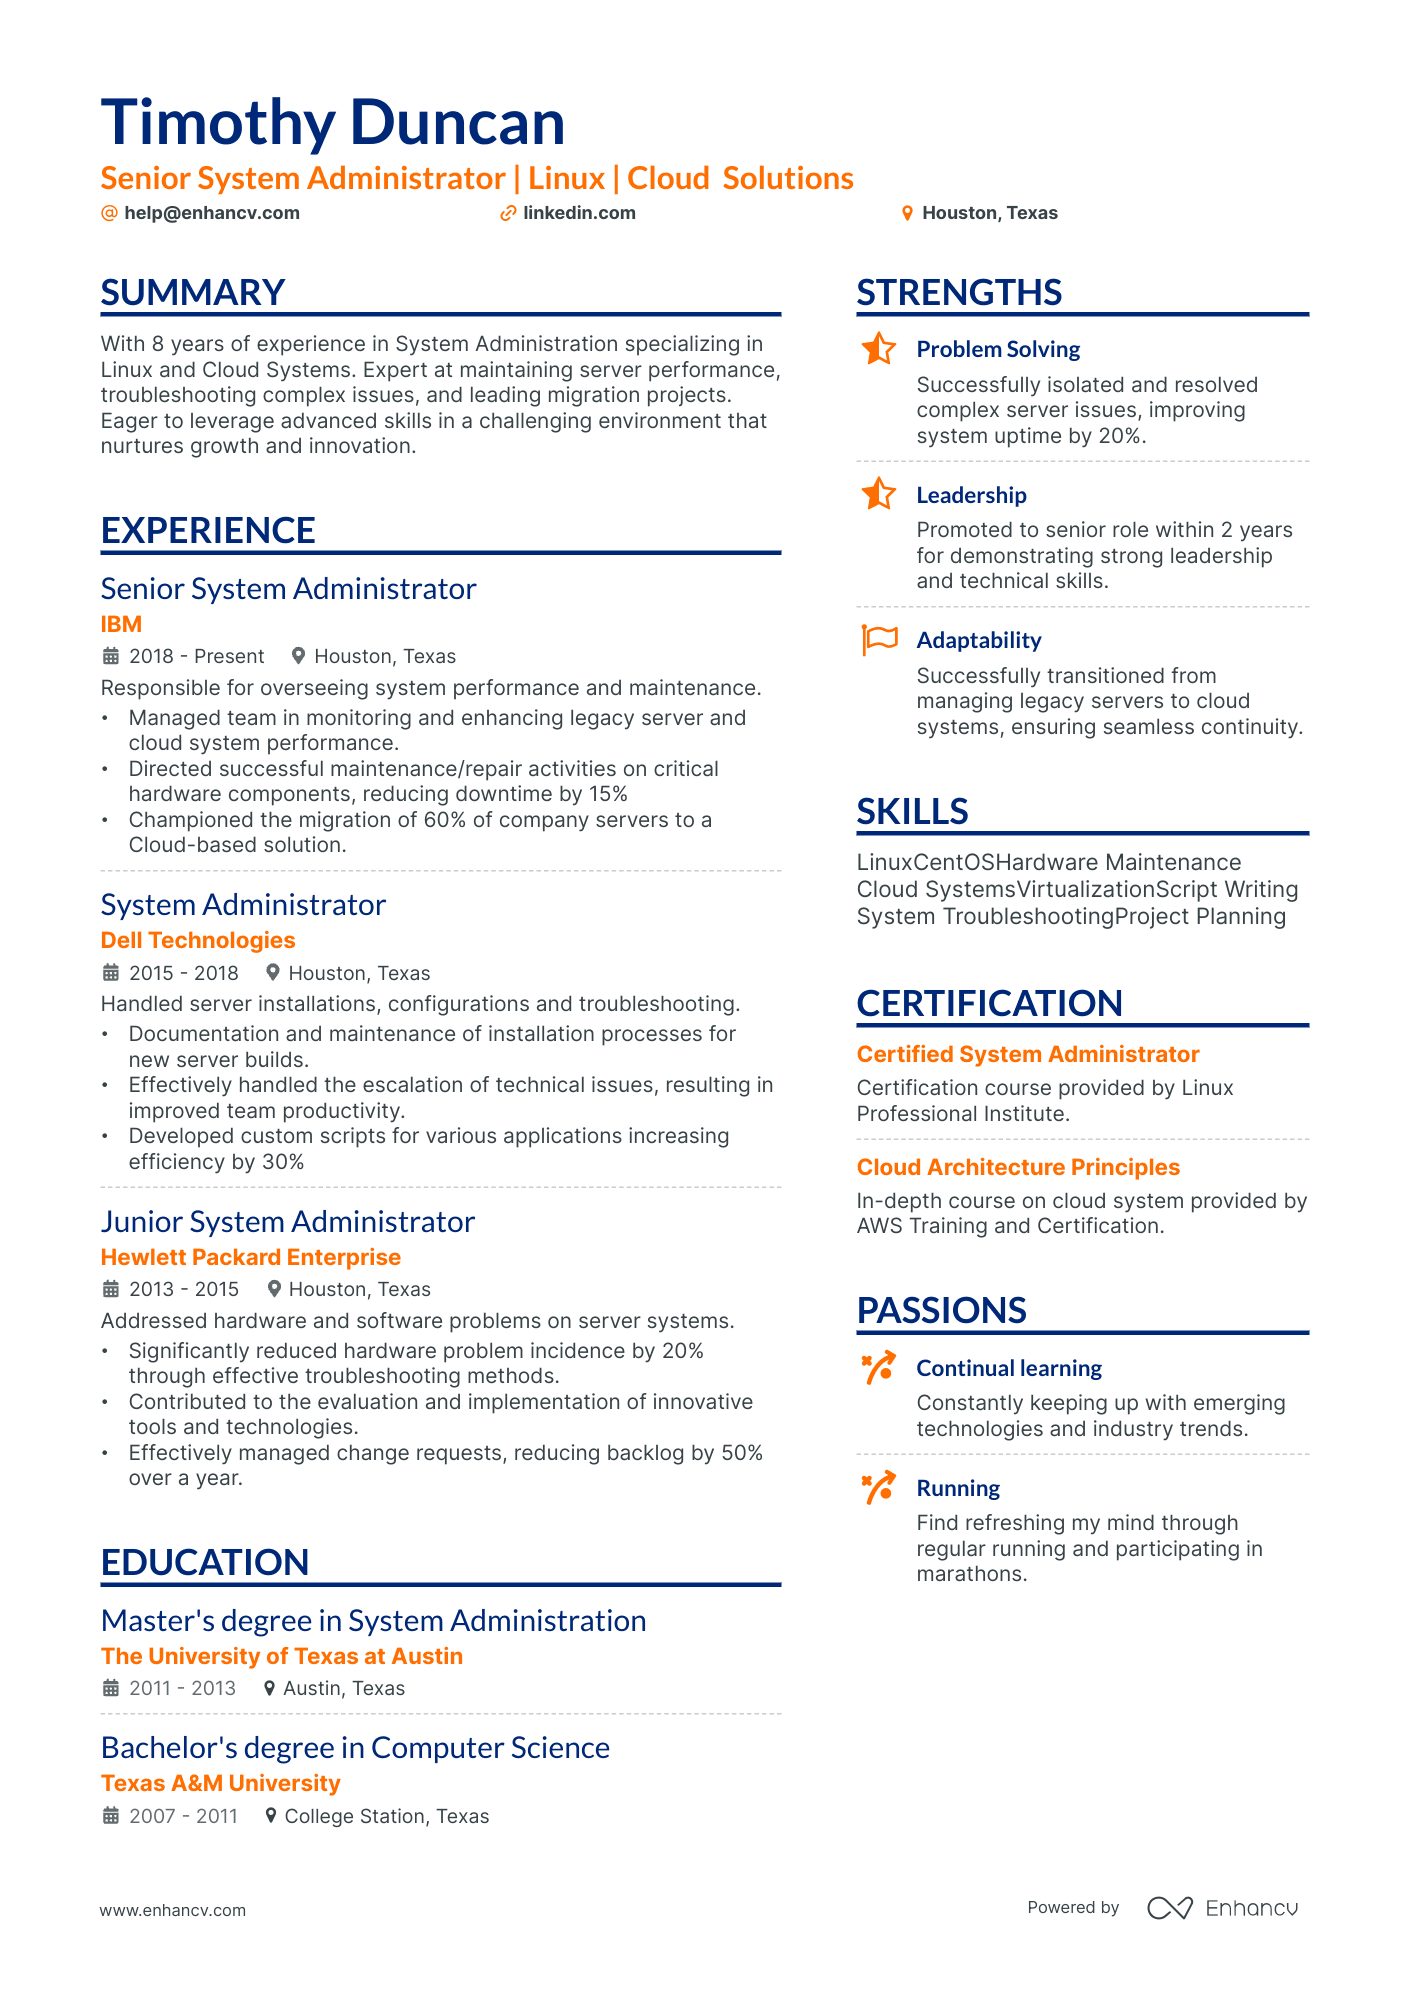 Linux System Administrator resume example